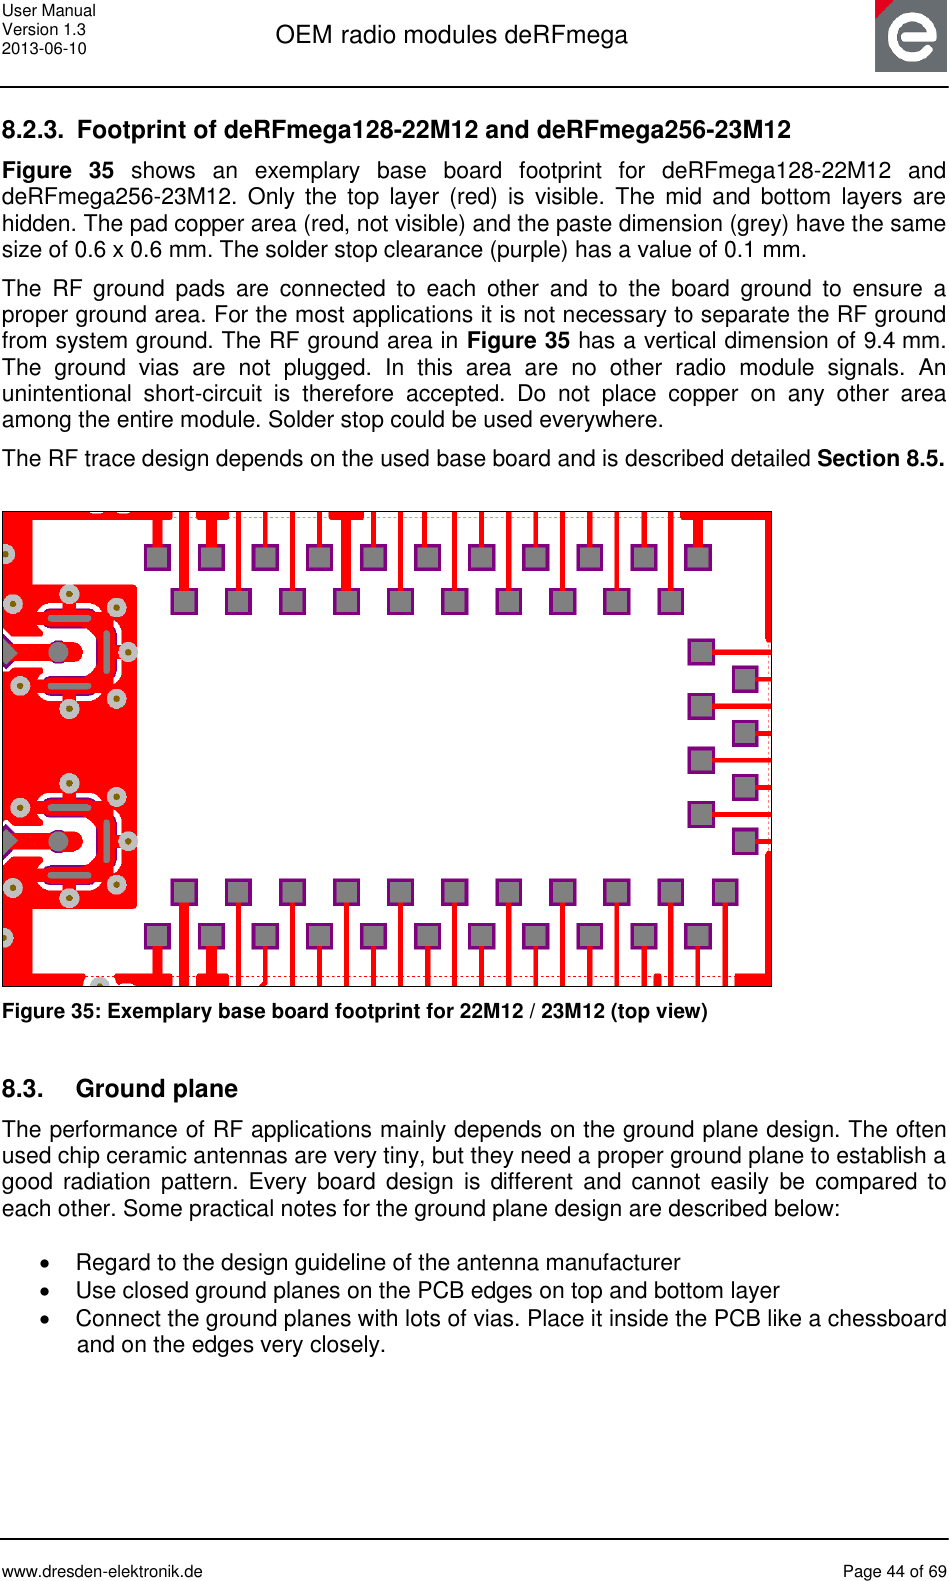 User Manual Version 1.3 2013-06-10  OEM radio modules deRFmega      www.dresden-elektronik.de  Page 44 of 69  8.2.3.  Footprint of deRFmega128-22M12 and deRFmega256-23M12 Figure  35  shows  an  exemplary  base  board  footprint  for  deRFmega128-22M12  and deRFmega256-23M12.  Only  the  top  layer  (red)  is  visible.  The  mid  and  bottom  layers  are hidden. The pad copper area (red, not visible) and the paste dimension (grey) have the same size of 0.6 x 0.6 mm. The solder stop clearance (purple) has a value of 0.1 mm. The  RF  ground  pads  are  connected  to  each  other  and  to  the  board  ground  to  ensure  a proper ground area. For the most applications it is not necessary to separate the RF ground from system ground. The RF ground area in Figure 35 has a vertical dimension of 9.4 mm. The  ground  vias  are  not  plugged.  In  this  area  are  no  other  radio  module  signals.  An unintentional  short-circuit  is  therefore  accepted.  Do  not  place  copper  on  any  other  area among the entire module. Solder stop could be used everywhere. The RF trace design depends on the used base board and is described detailed Section 8.5.   Figure 35: Exemplary base board footprint for 22M12 / 23M12 (top view)  8.3.  Ground plane The performance of RF applications mainly depends on the ground plane design. The often used chip ceramic antennas are very tiny, but they need a proper ground plane to establish a good  radiation  pattern. Every  board  design  is  different  and  cannot  easily  be  compared  to each other. Some practical notes for the ground plane design are described below:    Regard to the design guideline of the antenna manufacturer   Use closed ground planes on the PCB edges on top and bottom layer   Connect the ground planes with lots of vias. Place it inside the PCB like a chessboard and on the edges very closely.  